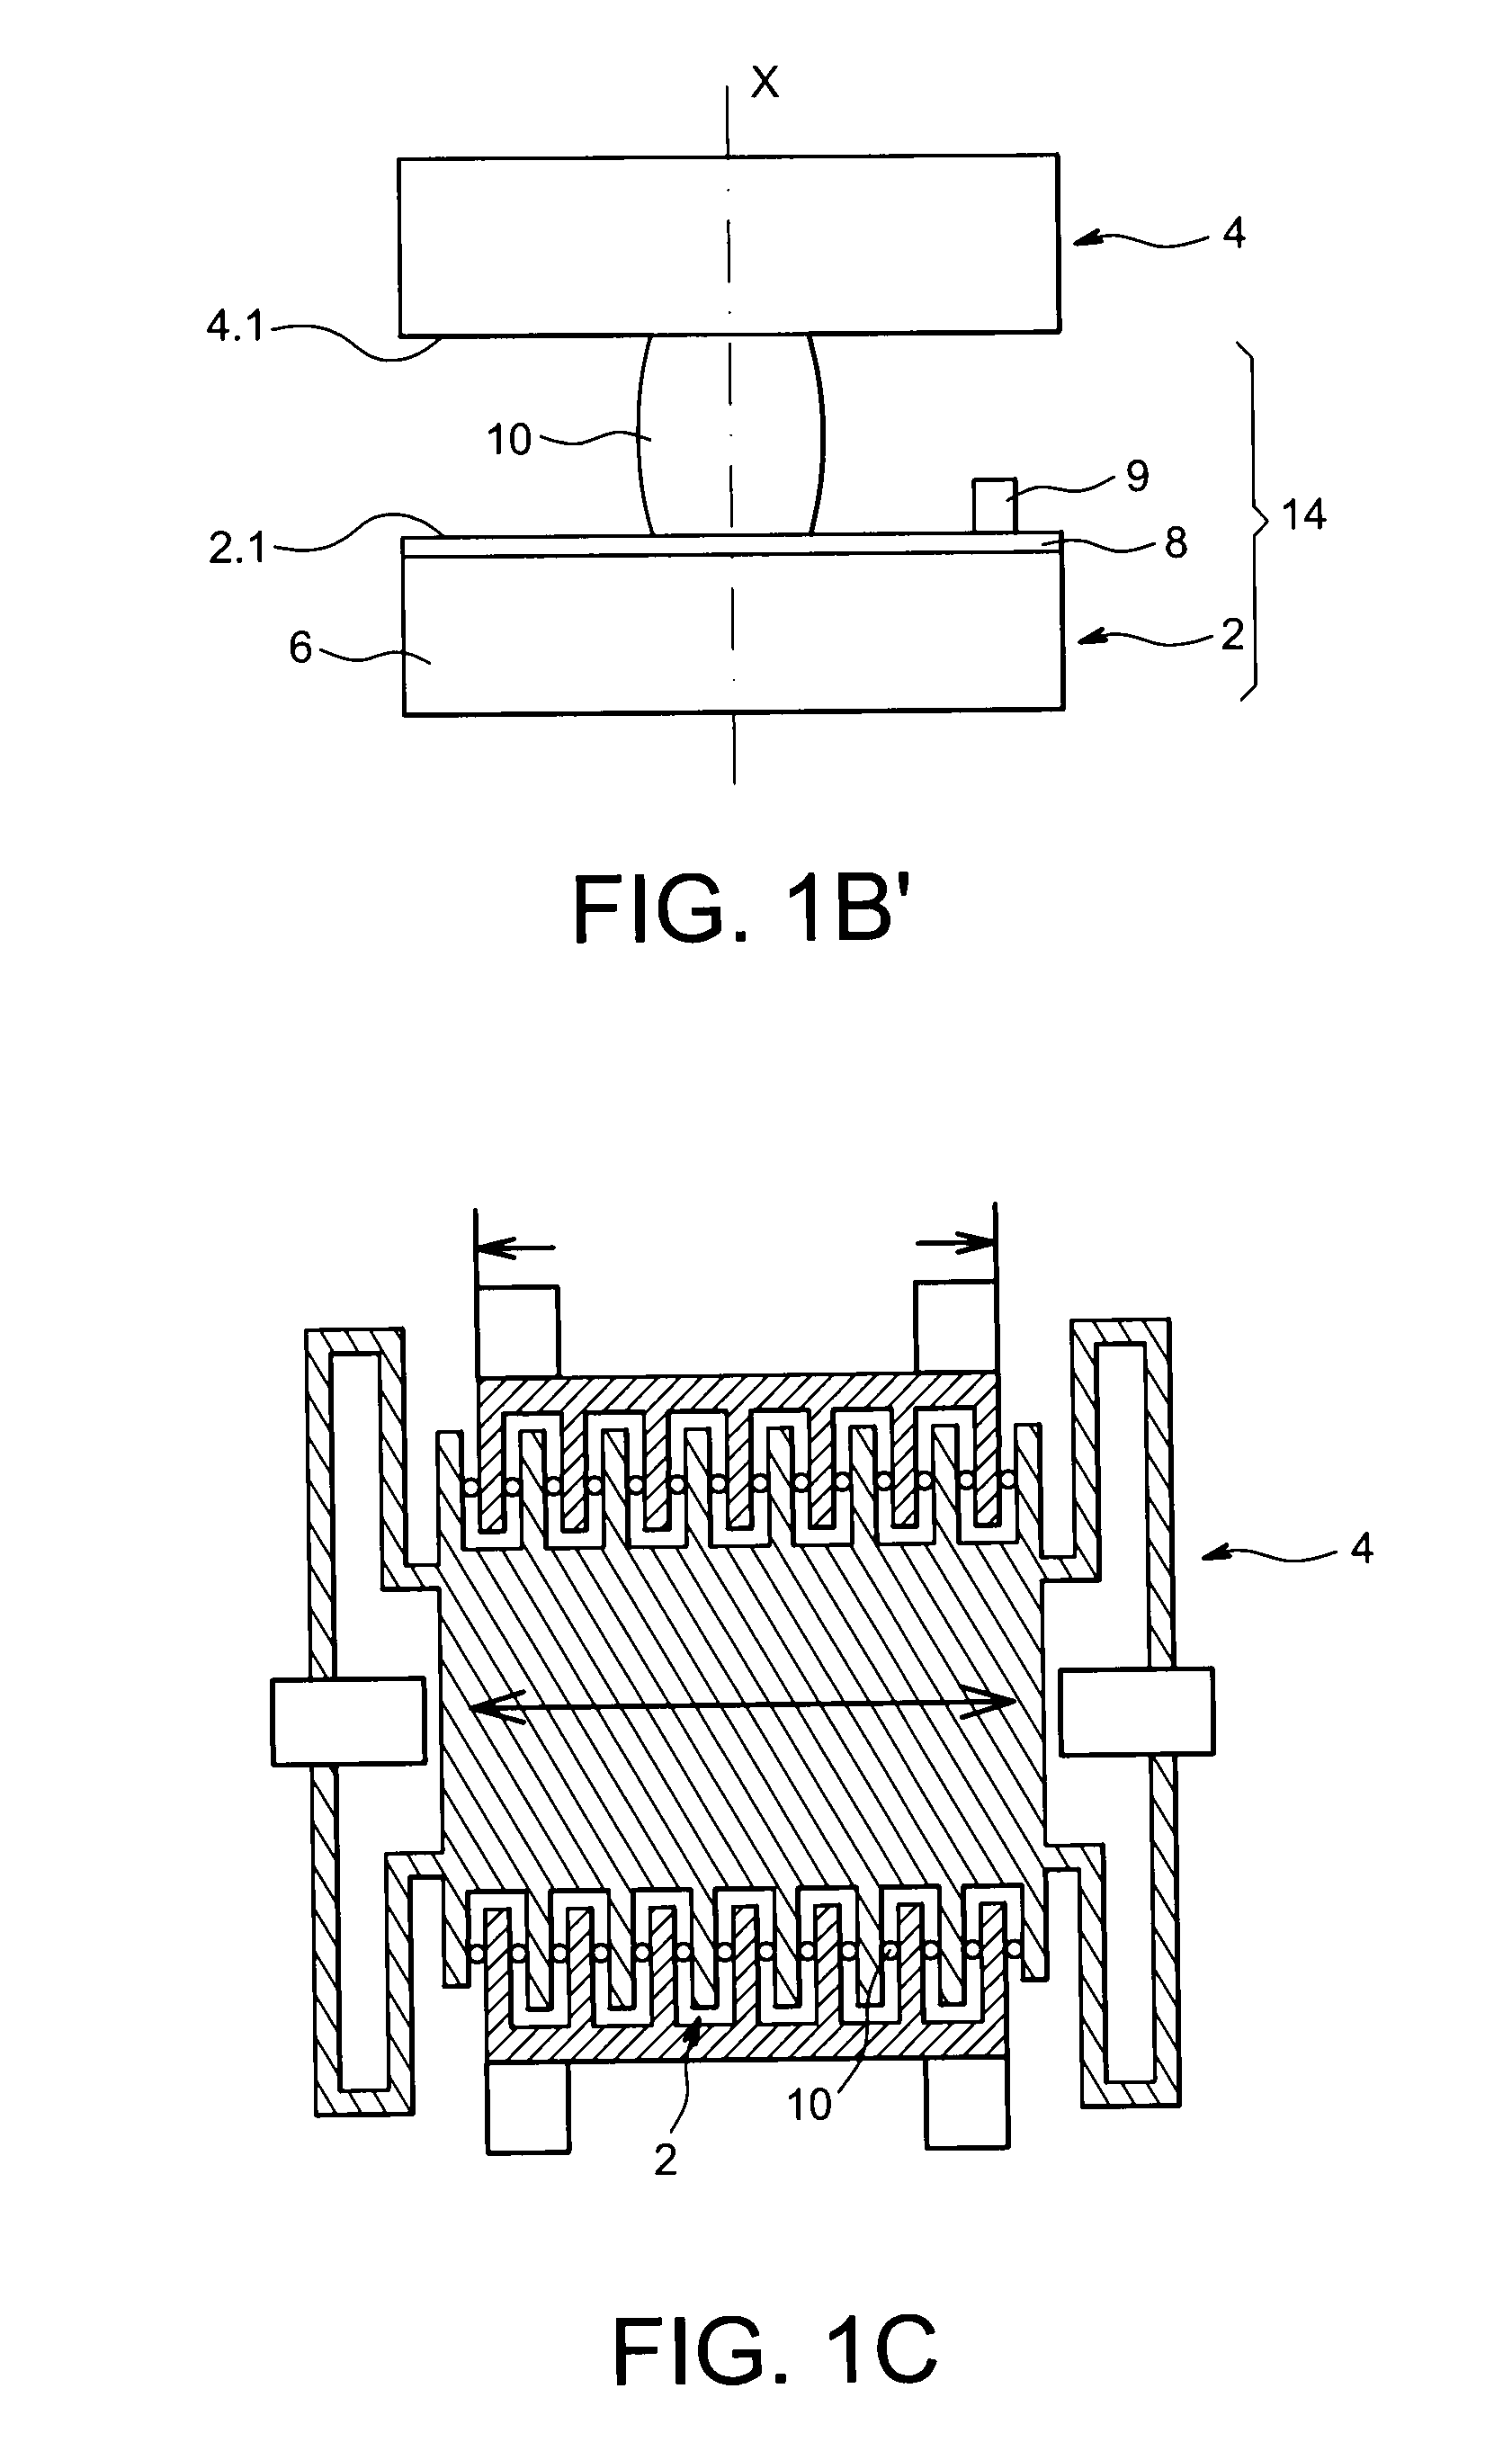 Energy recovering device with a liquid electrode